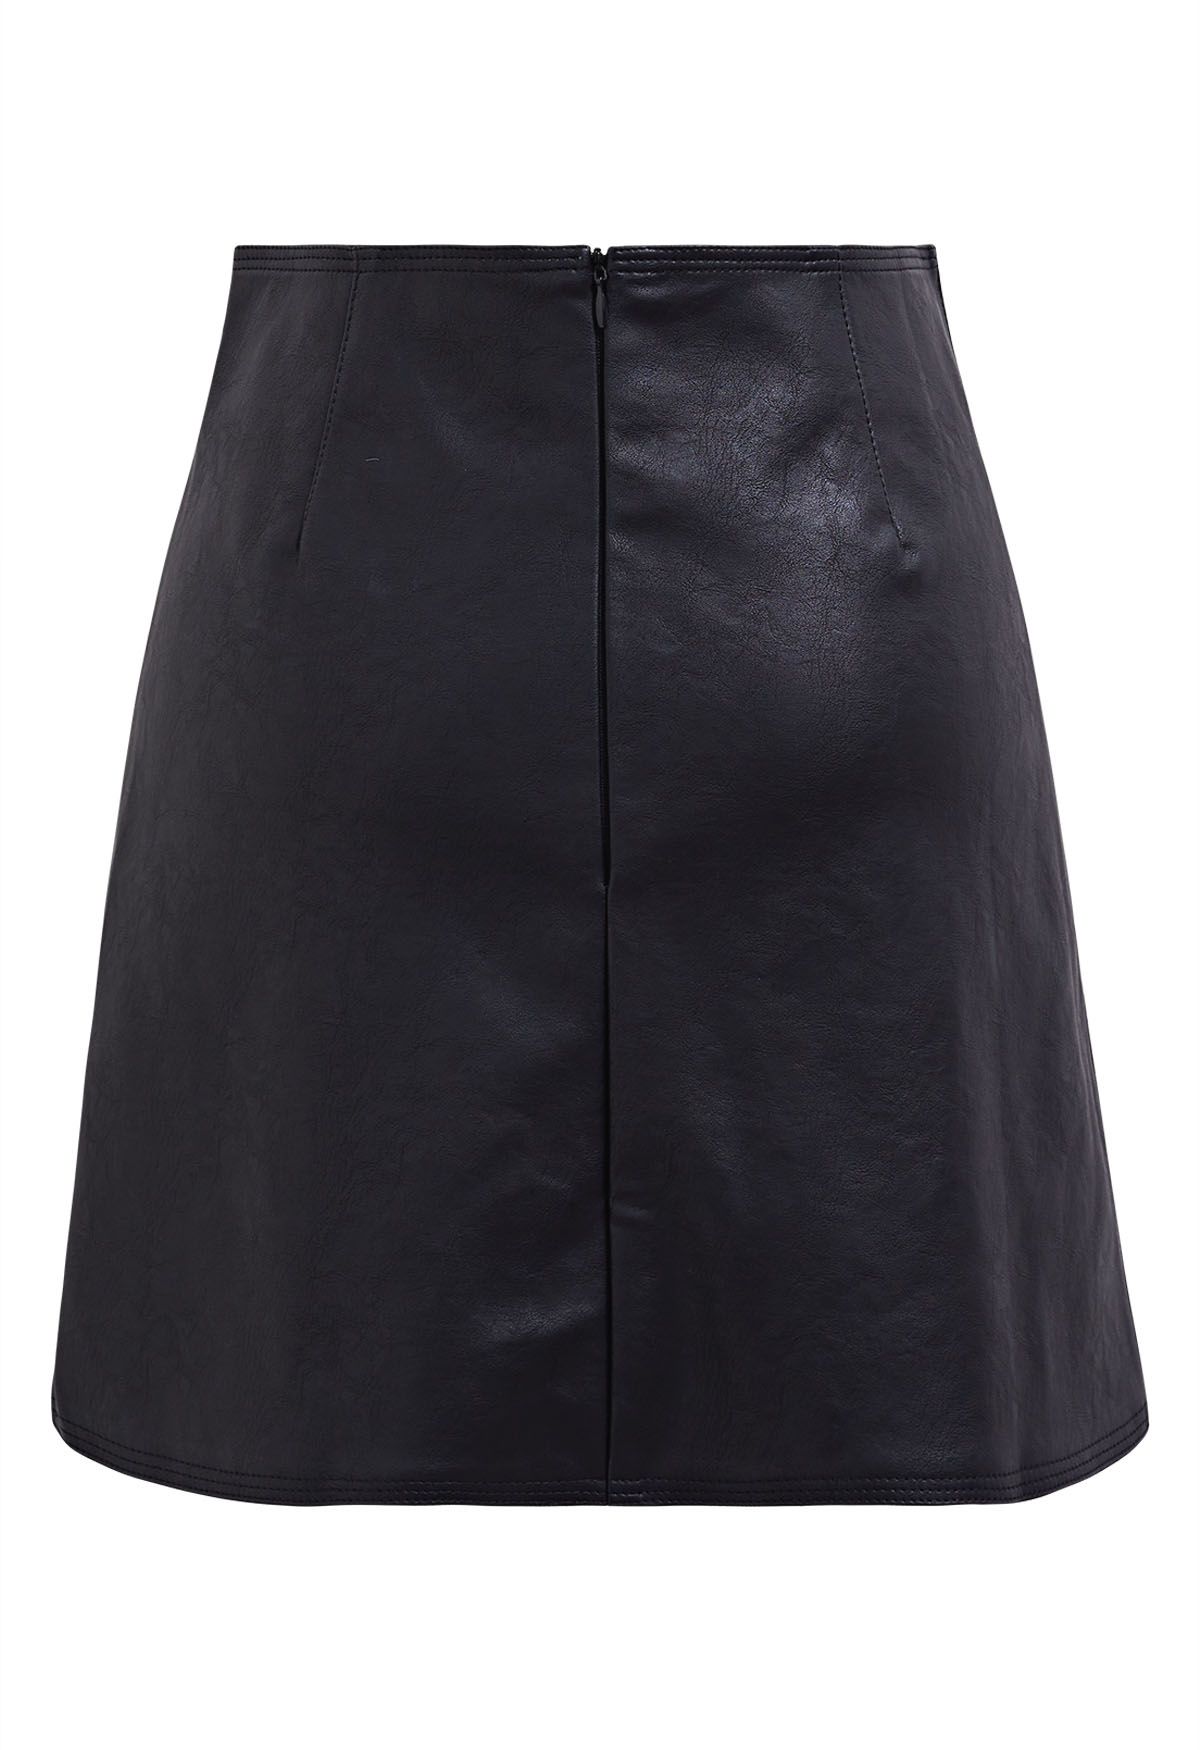 Button Trimmed Faux Leather Mini Skirt in Black